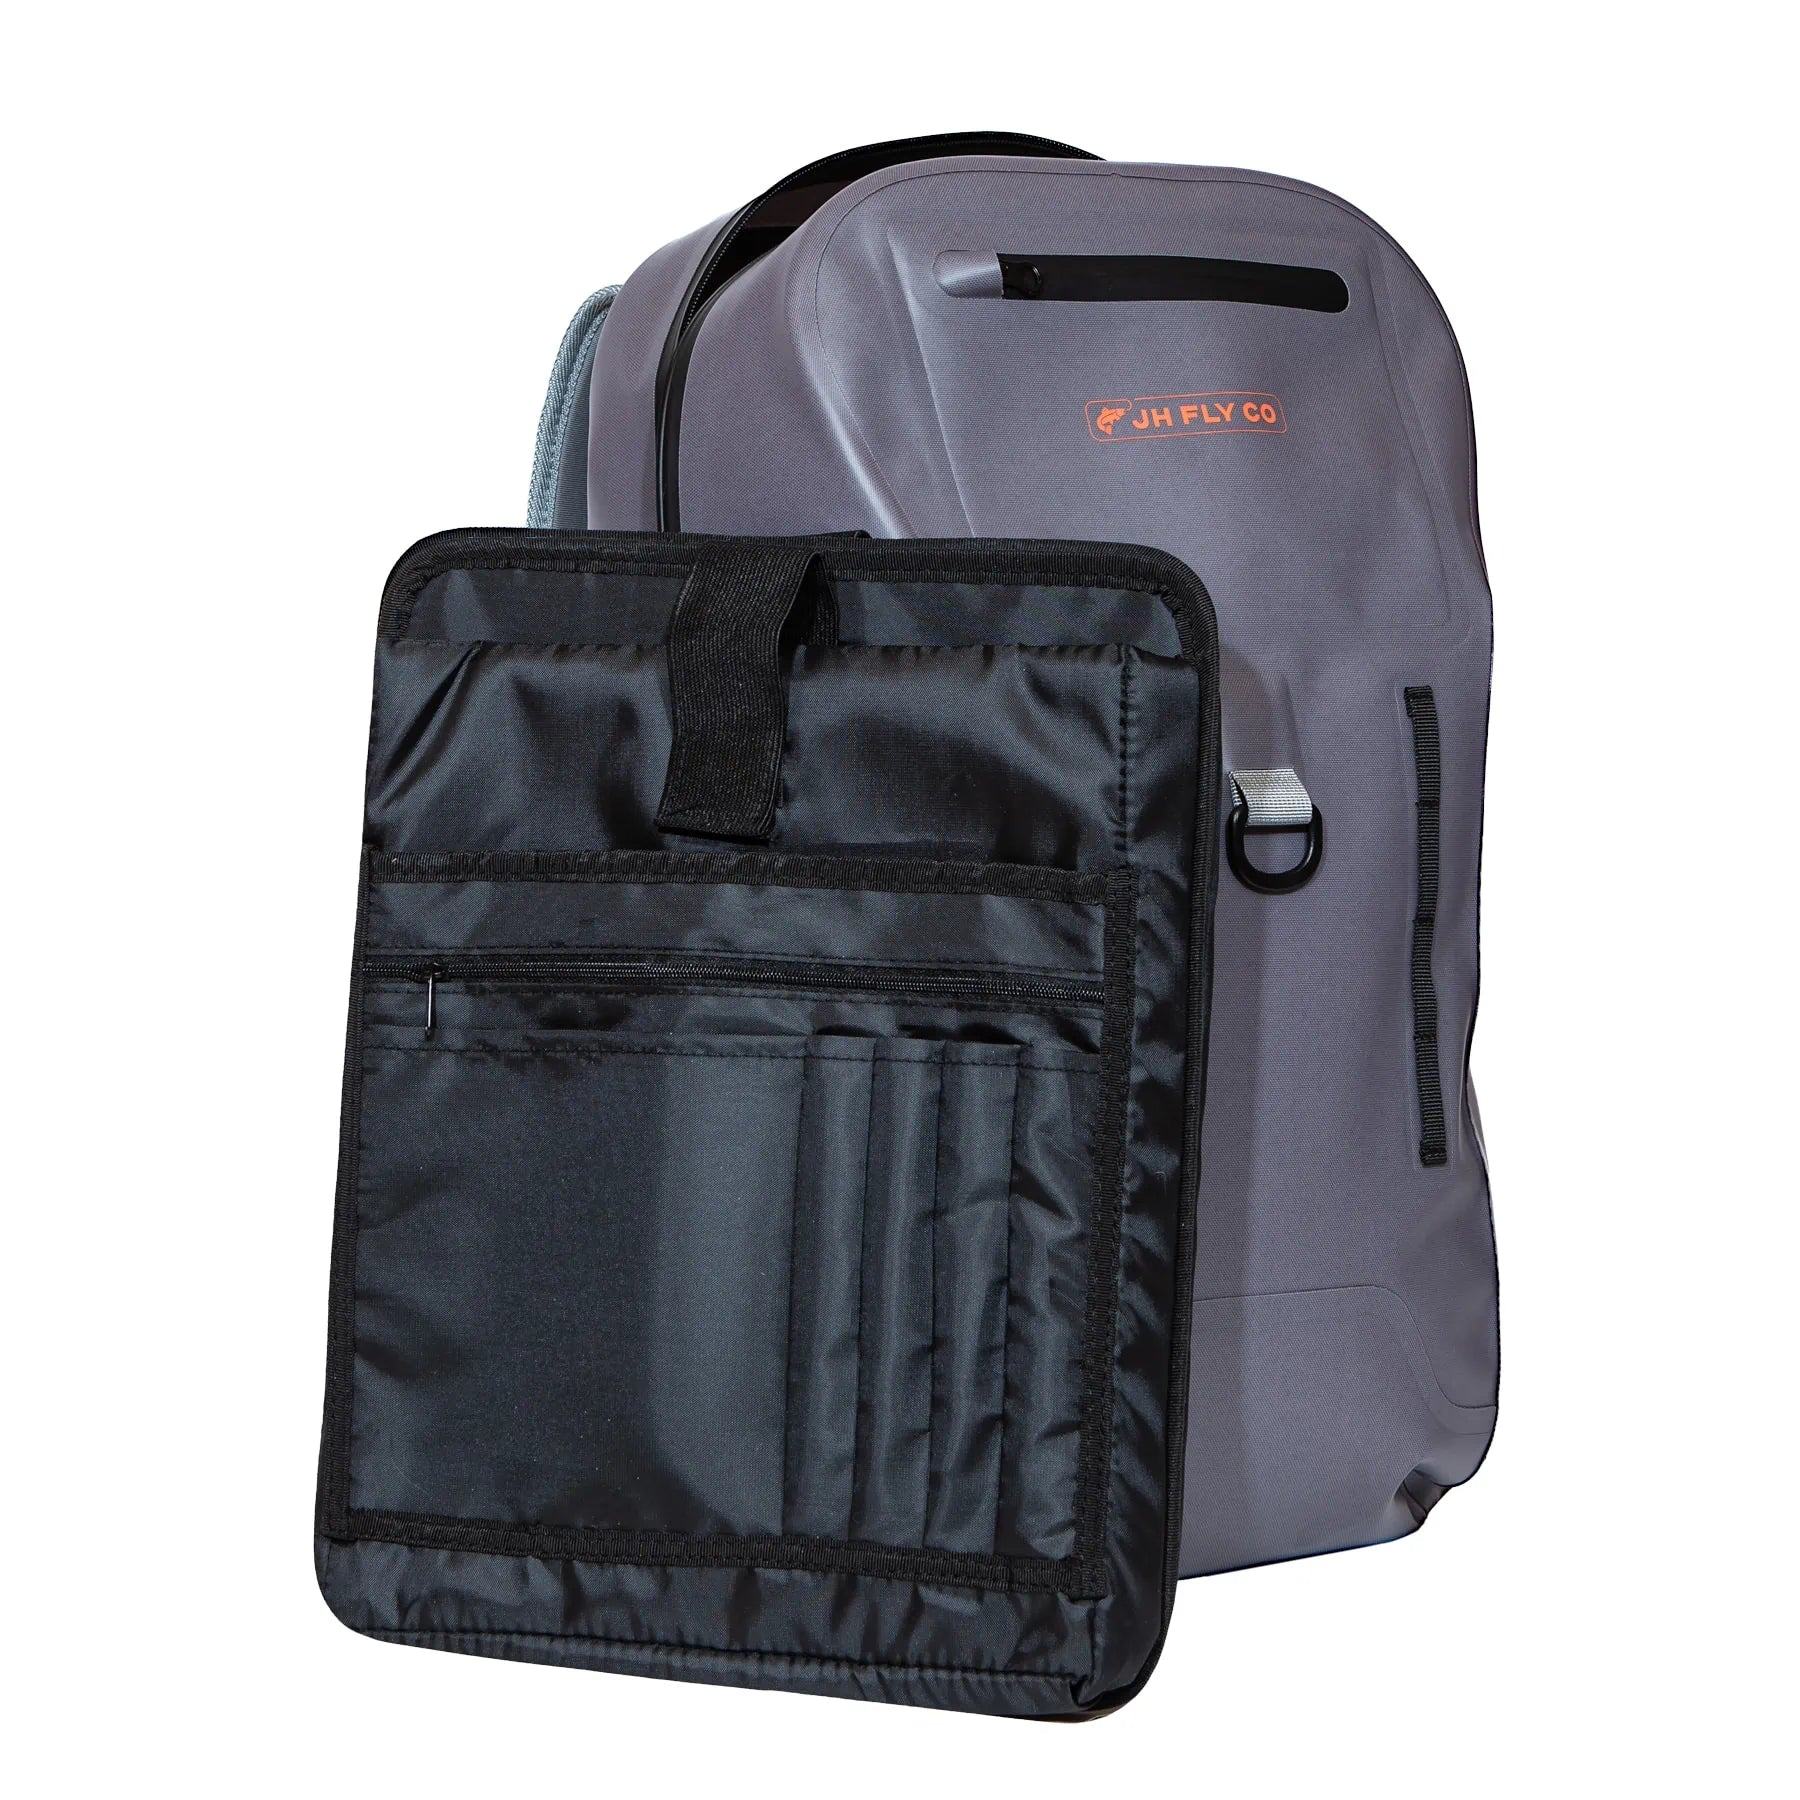 Fly fishing pack 24L waterproof backpack Manufacturers and